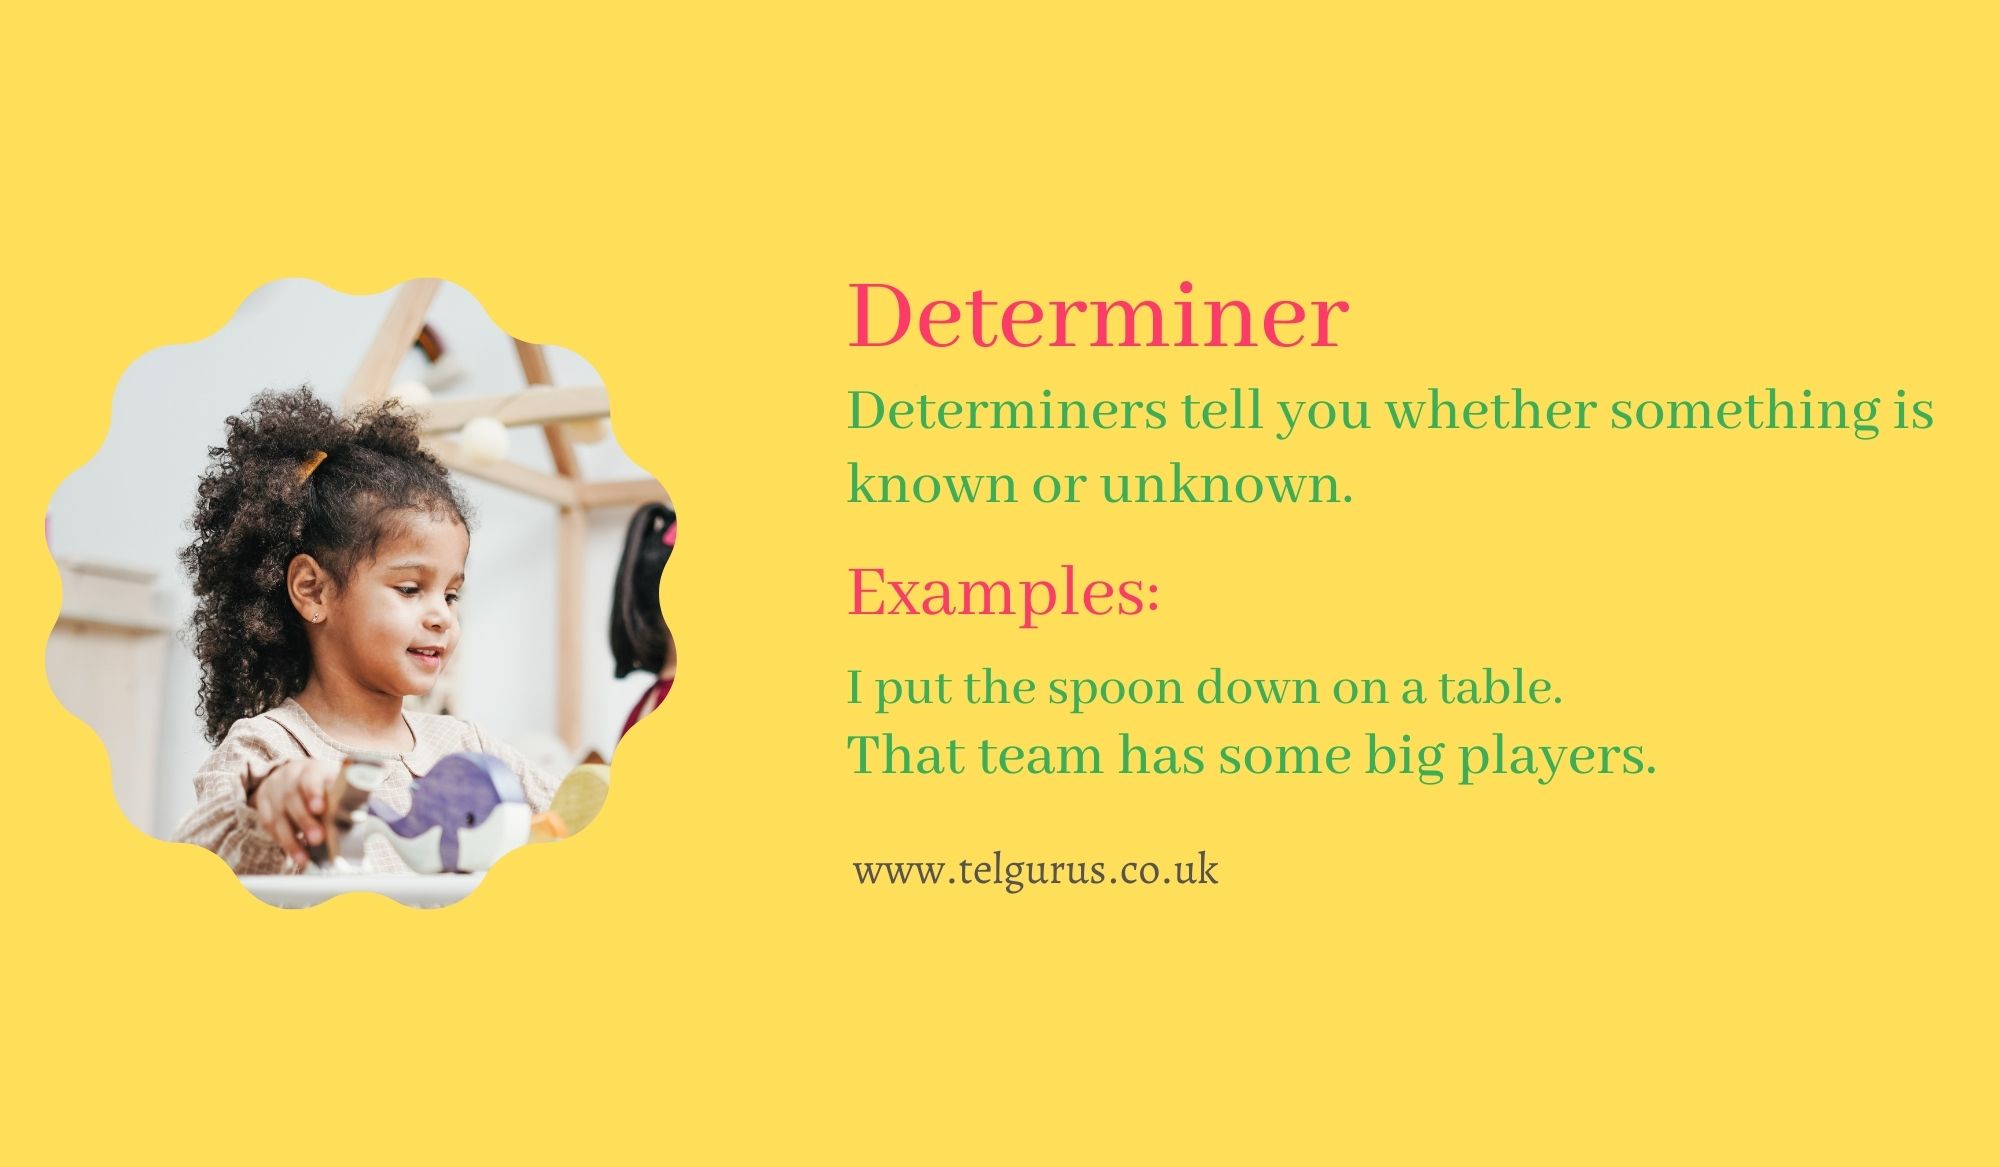 What is a determiner in English